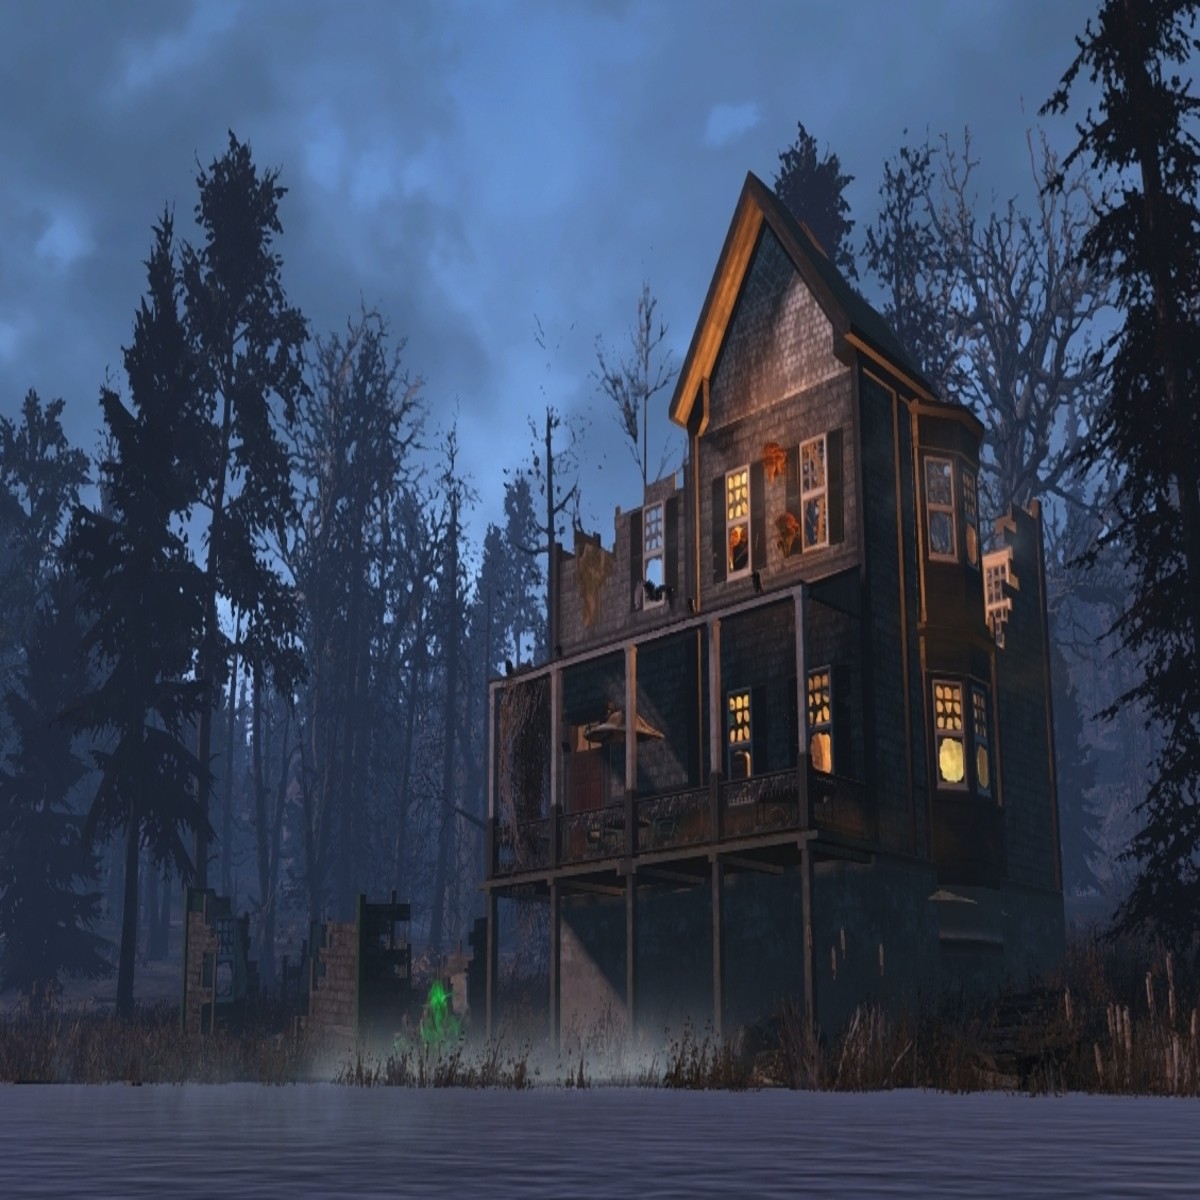 Fallout 4 horror mod The Wilderness will leave you feeling spooked